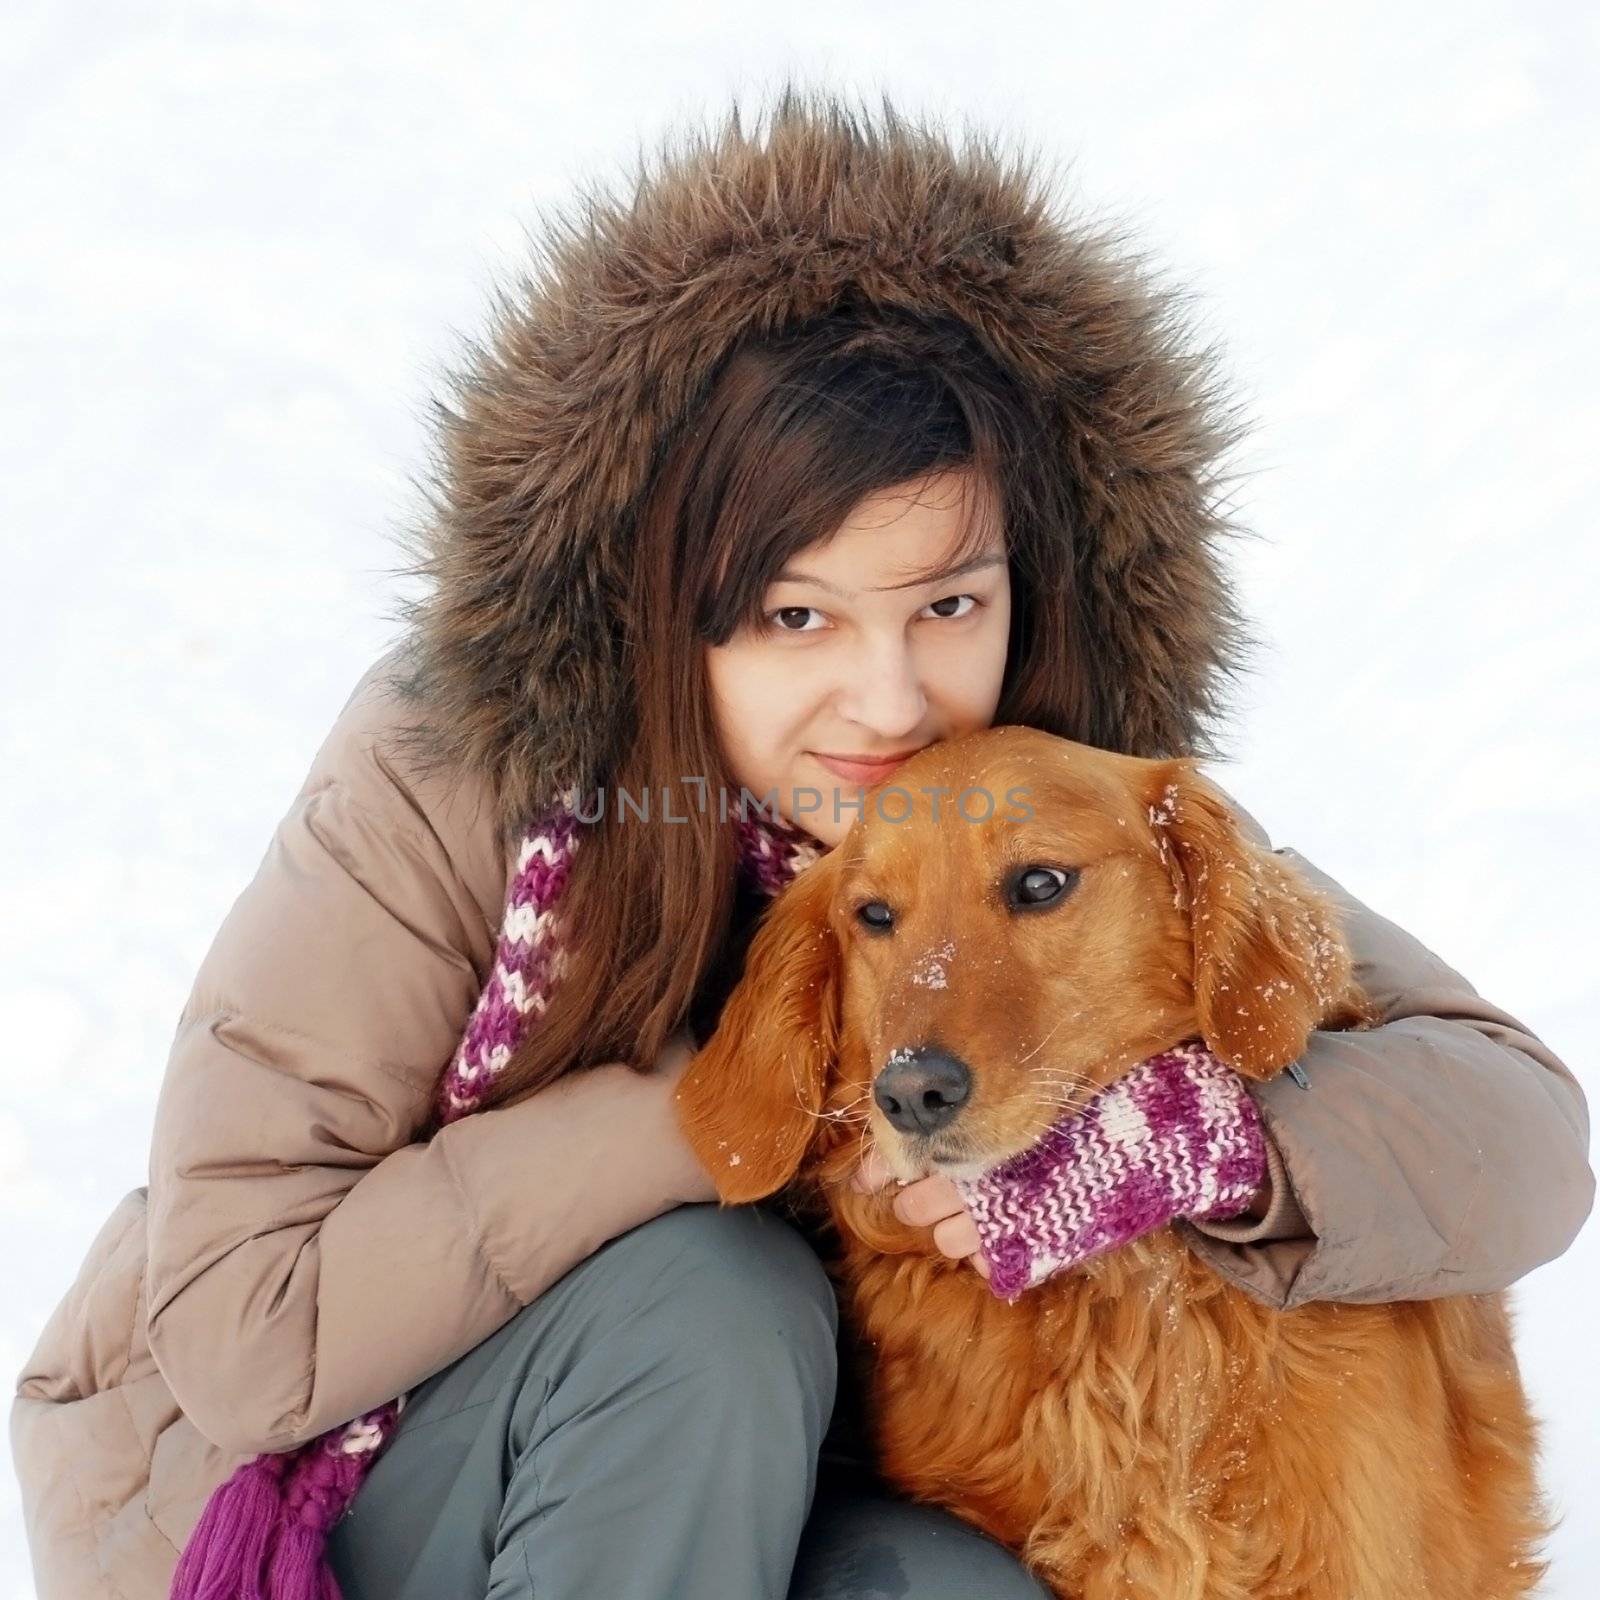 smiling teenager caucasian girl in hood hugging her dog outdoors at snow